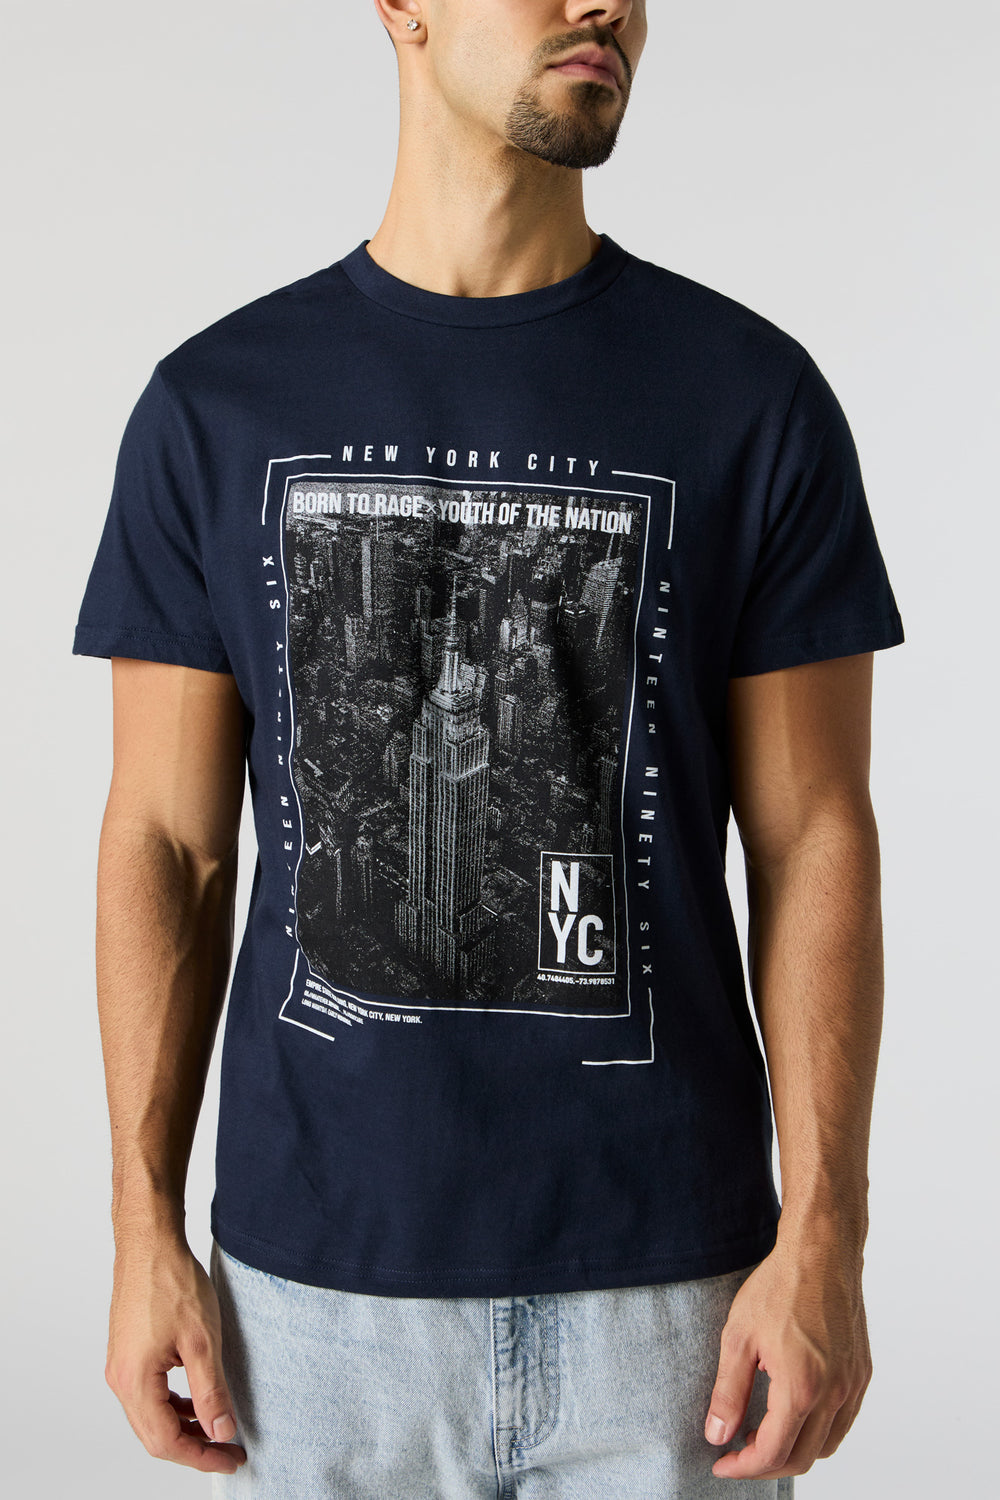 Empire State Building Graphic T-Shirt Empire State Building Graphic T-Shirt 1